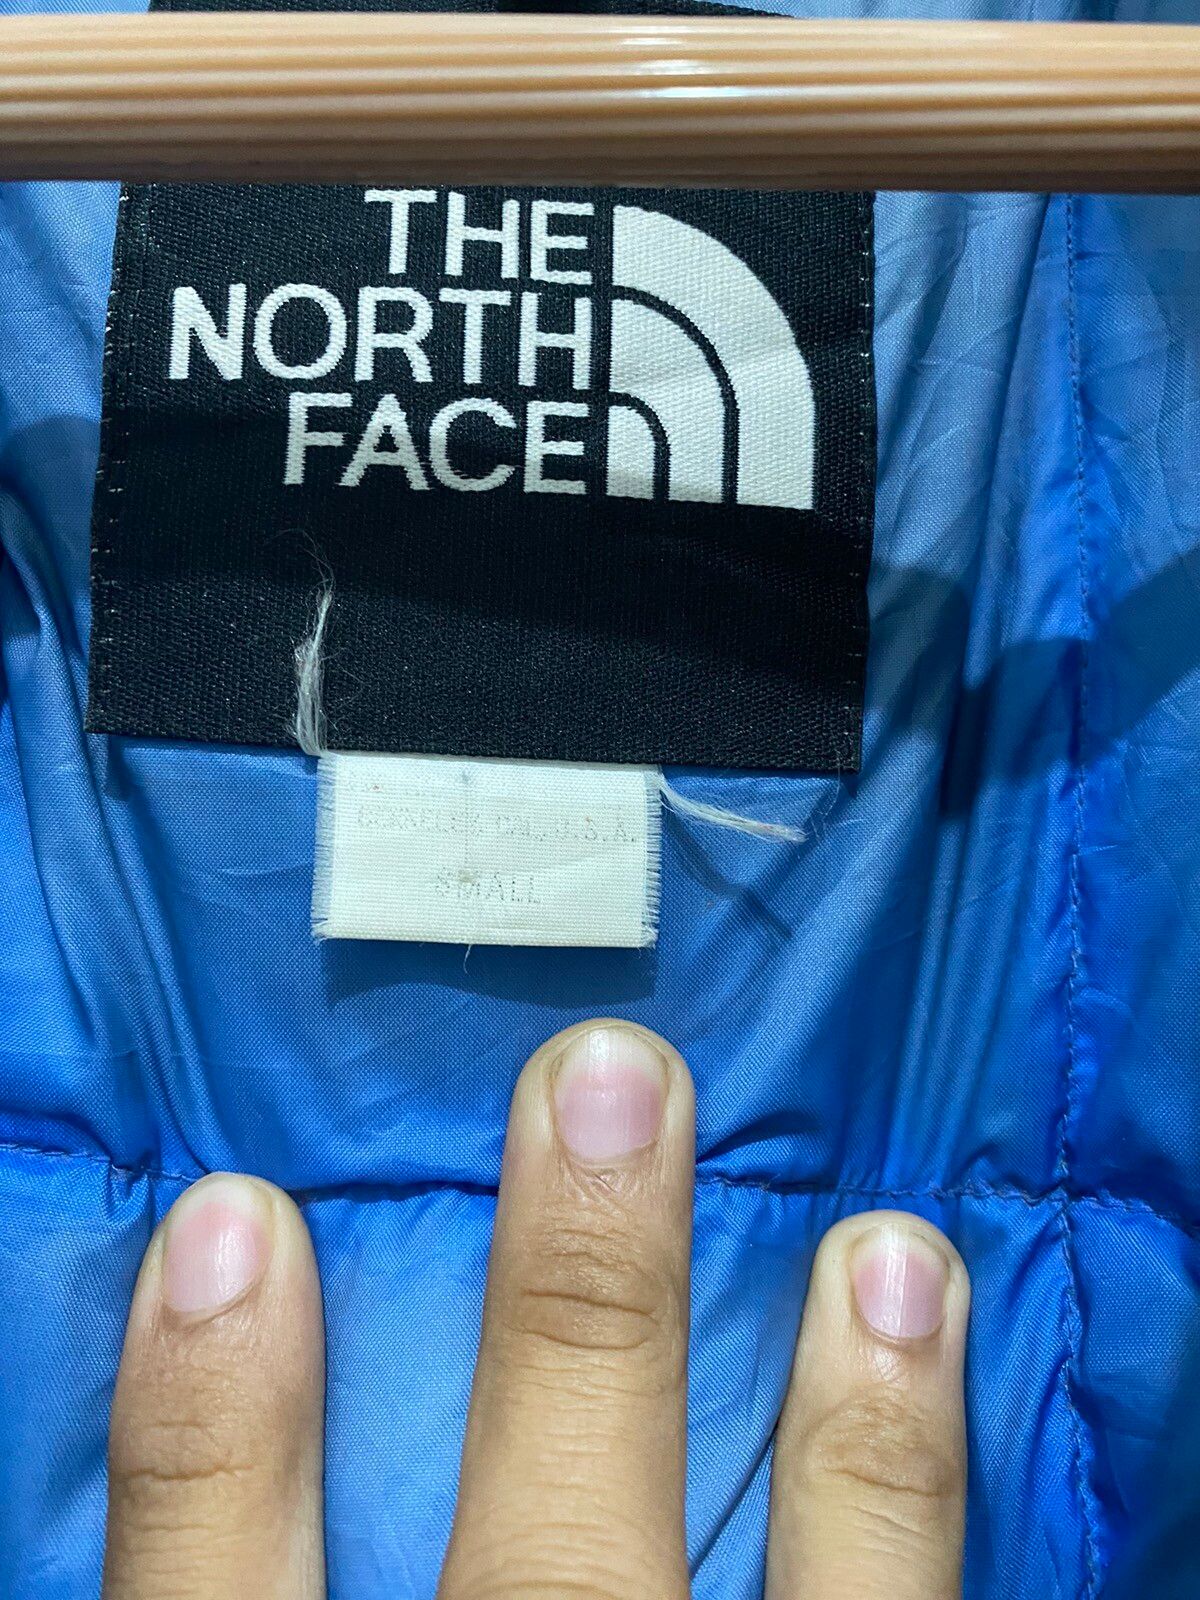 The North Face Puffer Jacket - 11